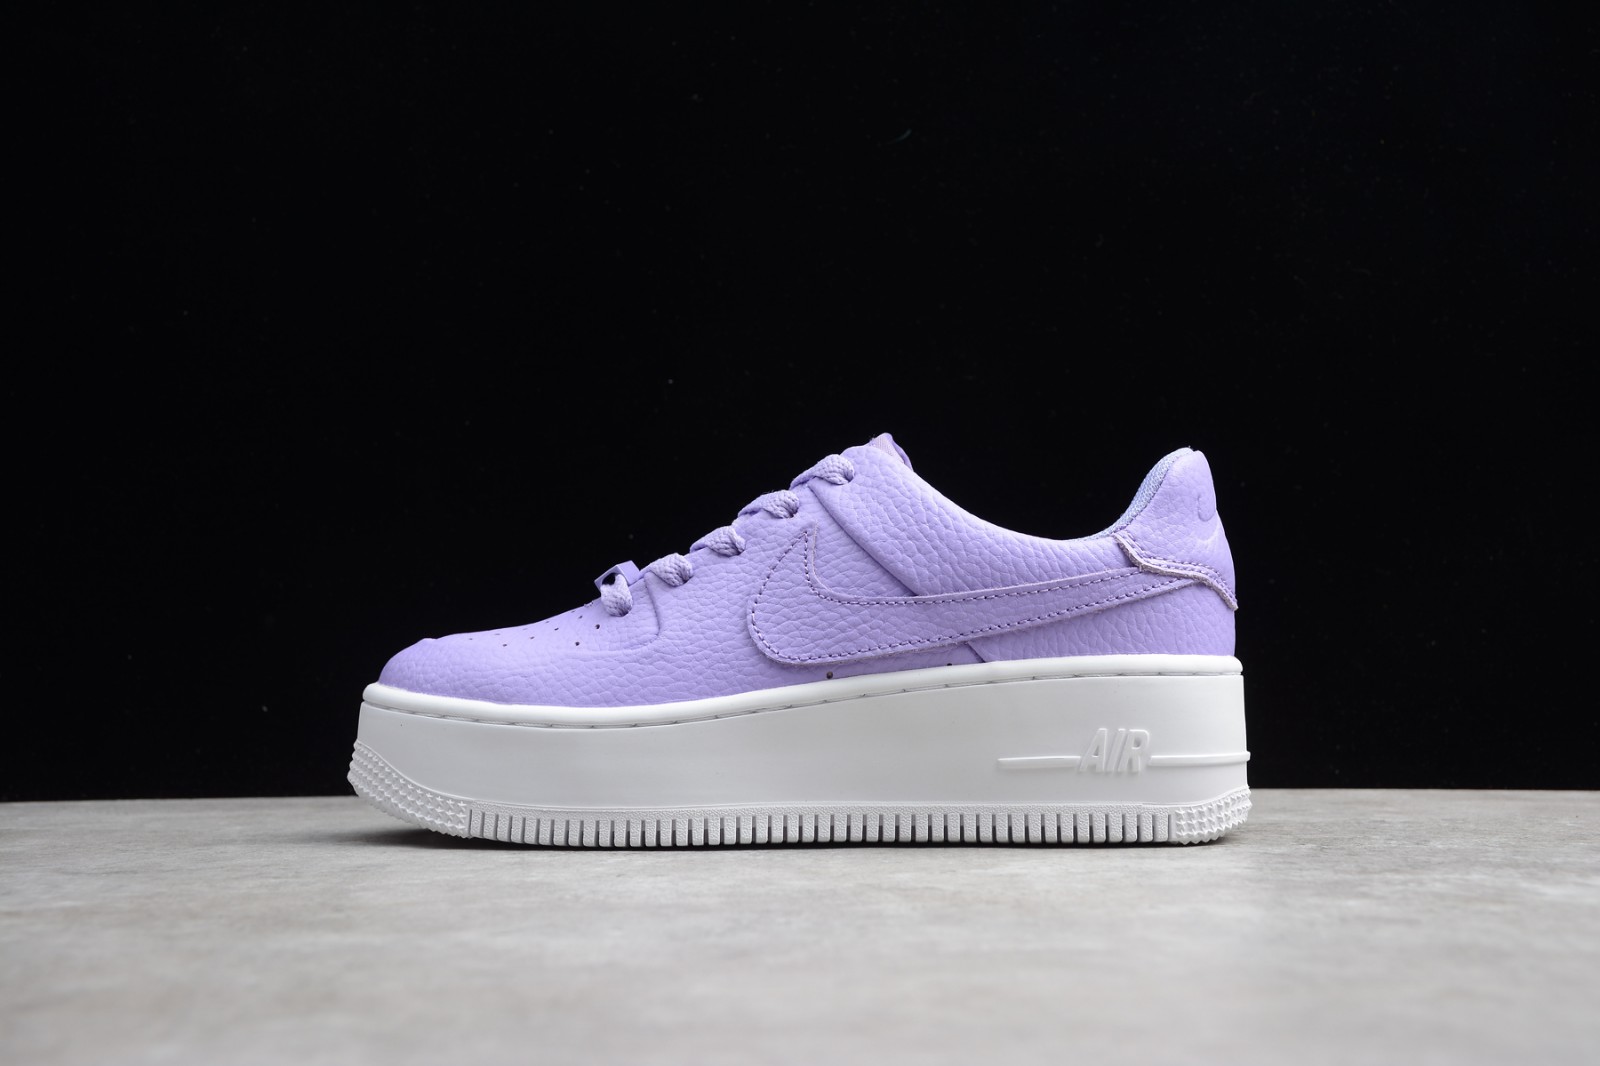 Air Force quickness 1 Sage Low Oxygen Purple White AR5339 - 500 - nike huarache stockx women sneakers price list - NwfpsShops